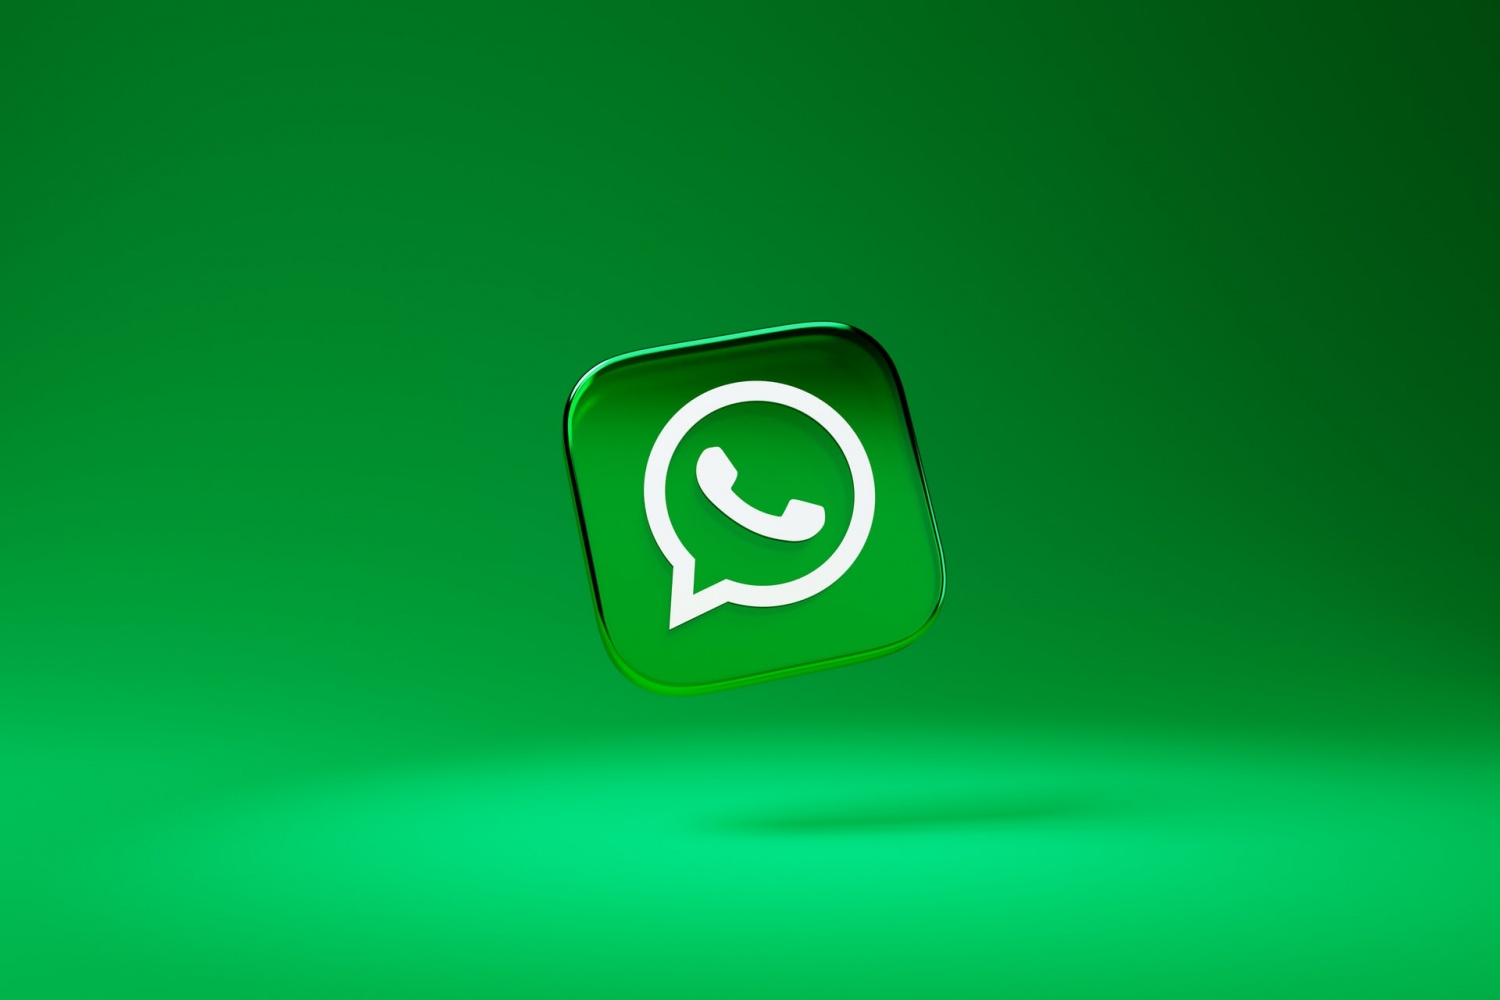 WhatsApp Users Beware: New Phishing Campaign Imitates App's Voice Message Feature